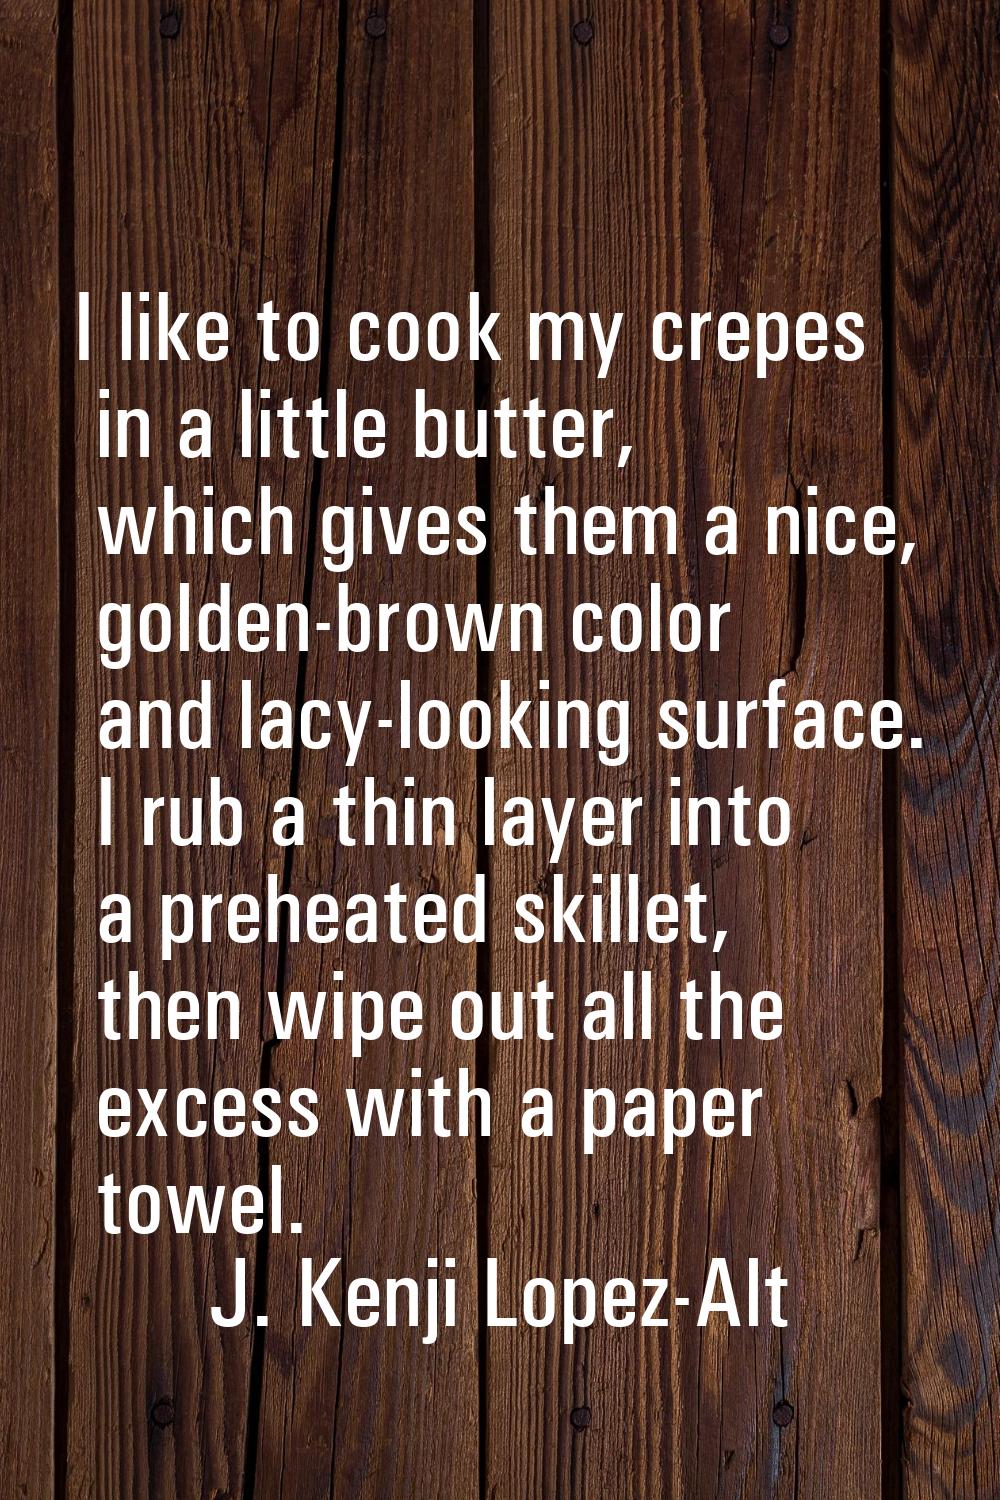 I like to cook my crepes in a little butter, which gives them a nice, golden-brown color and lacy-l